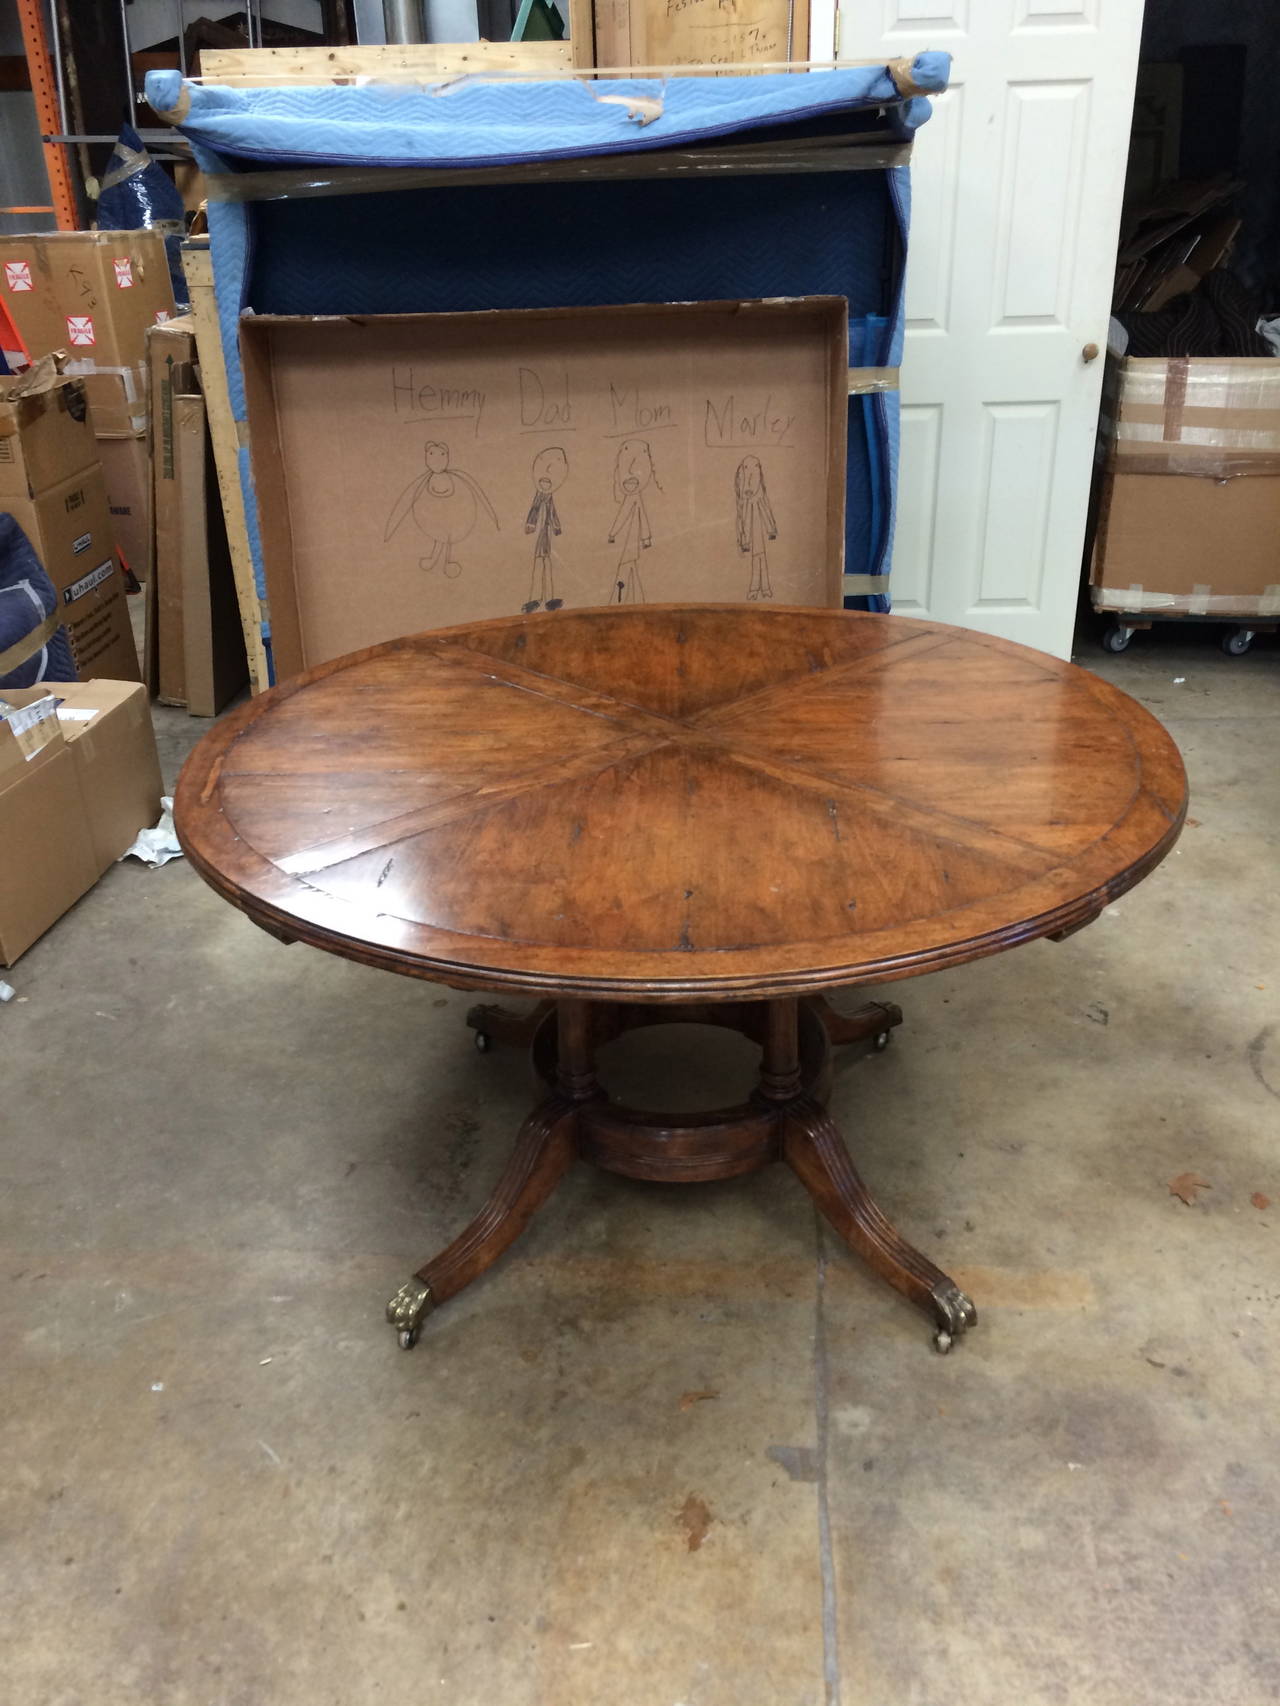 American Classical Style Guy Chaddock Round Table with Leaves around Periphery